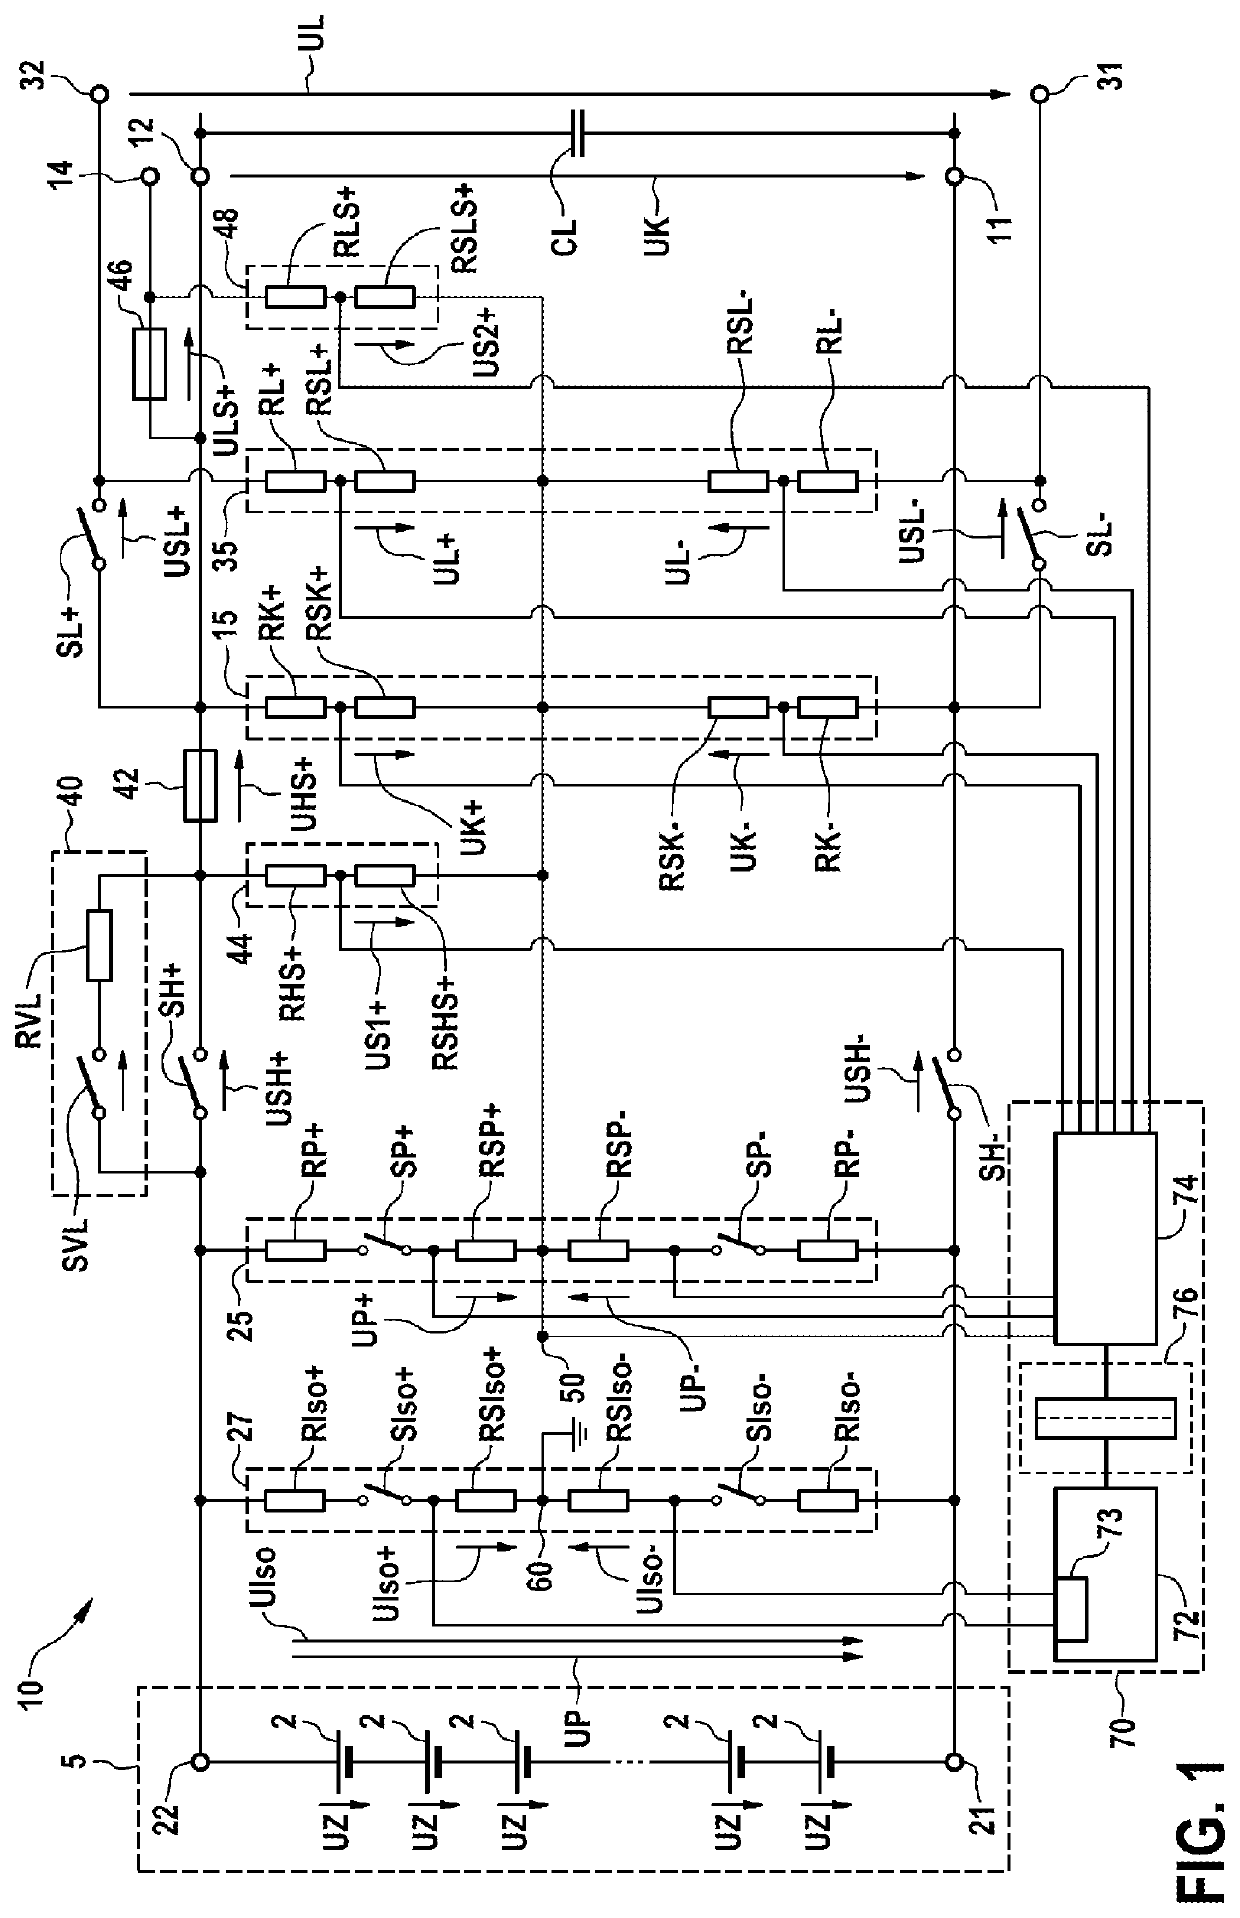 Battery system, method for diagnosing a battery system, and motor vehicle